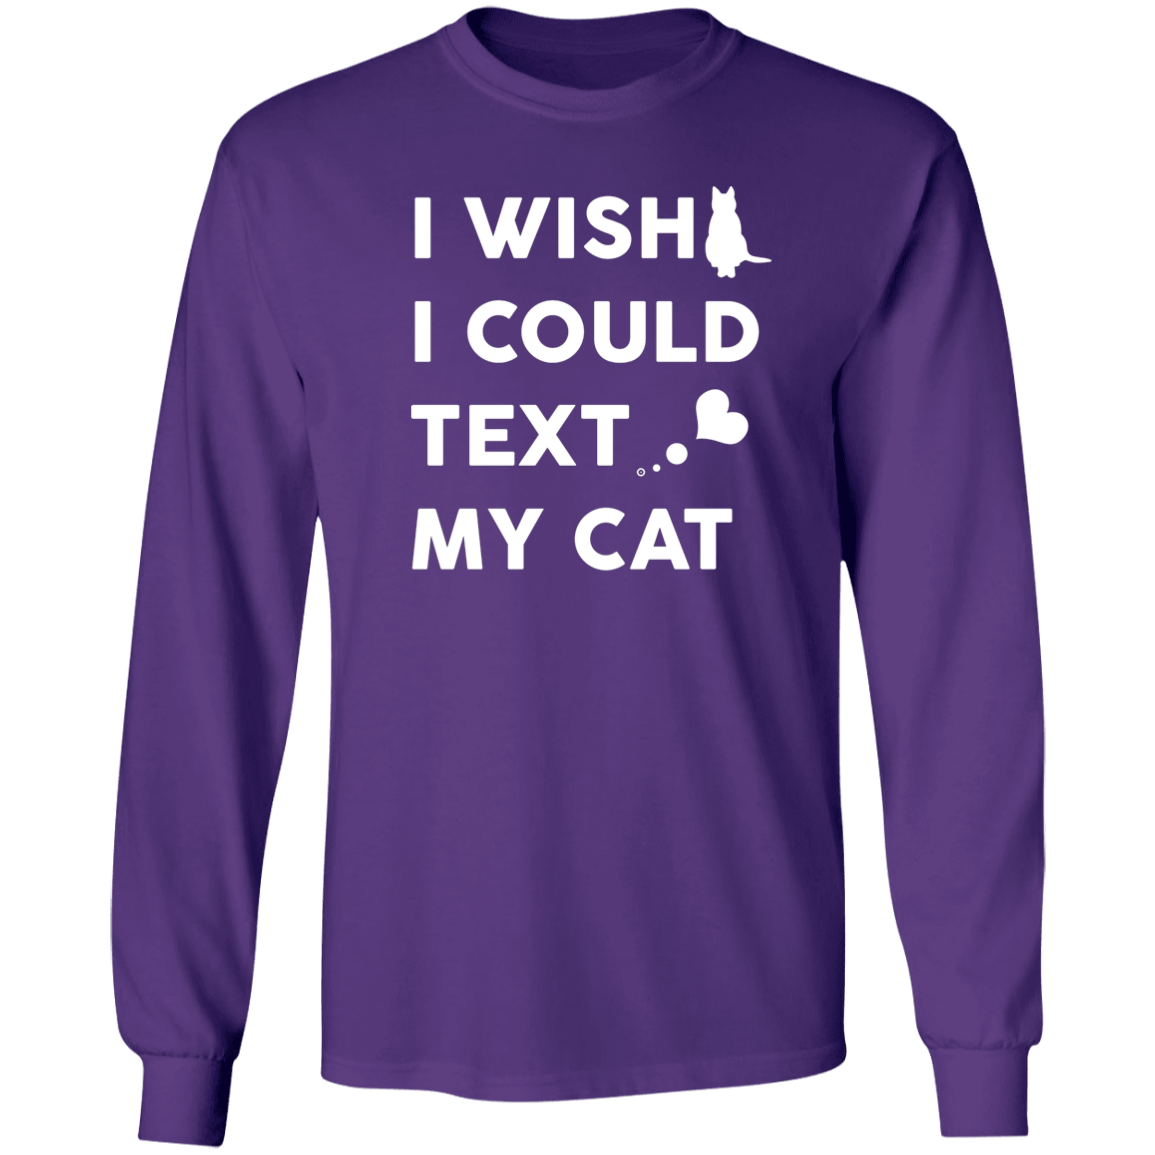 I Wish I Could Text My Cat - Long Sleeve T Shirt.